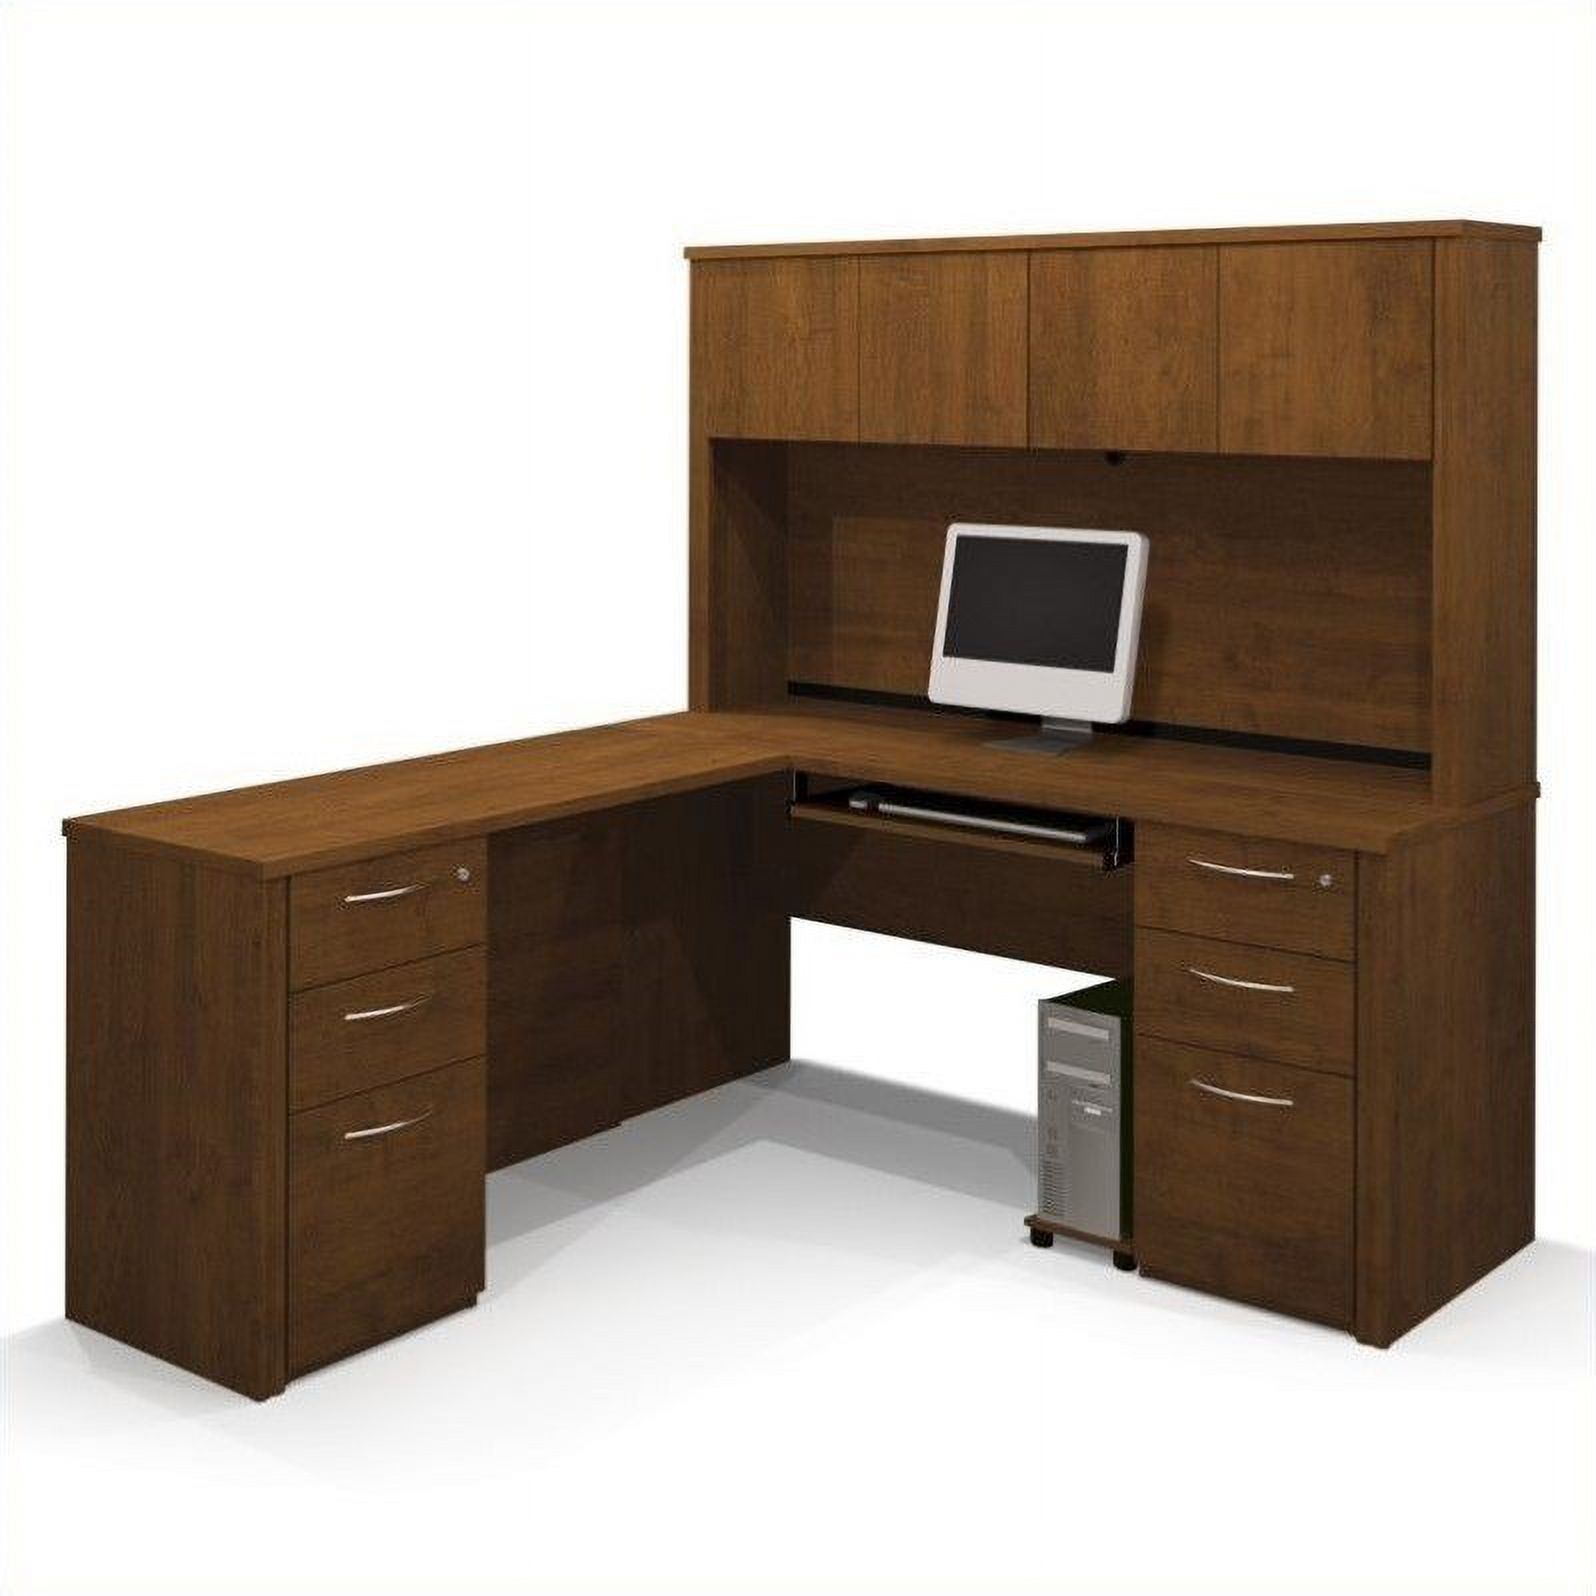 Bestar Embassy L-shaped Workstation with 2 Assembled Pedestals in Tuscany Brown - image 1 of 3